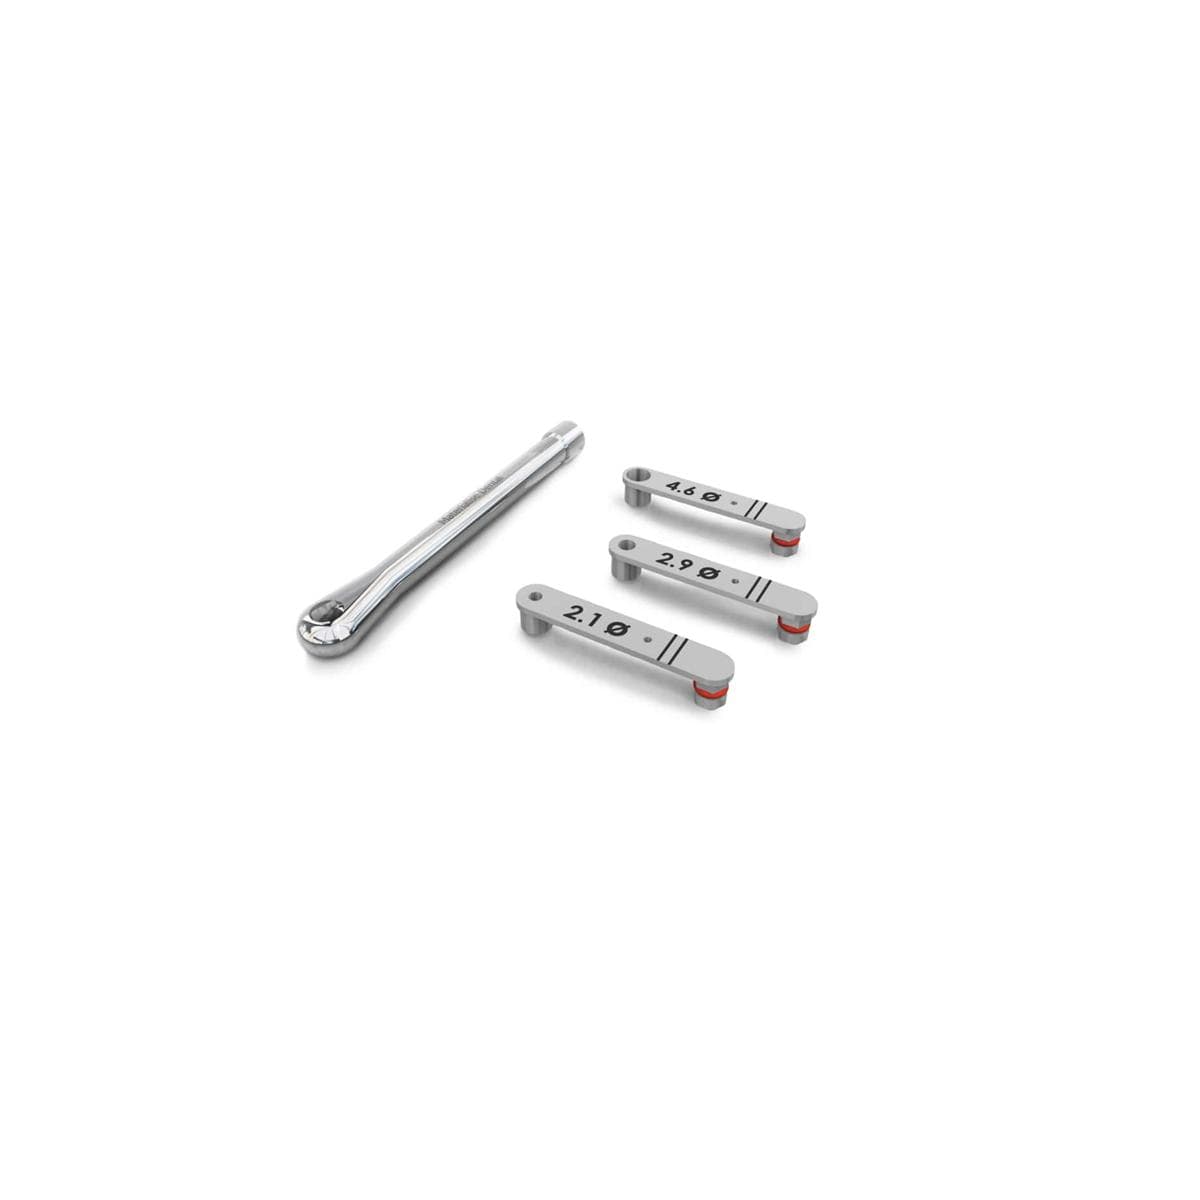 Cl de forage DENTSPLY SIRONA - Diamtre 3.2mm - Taille M